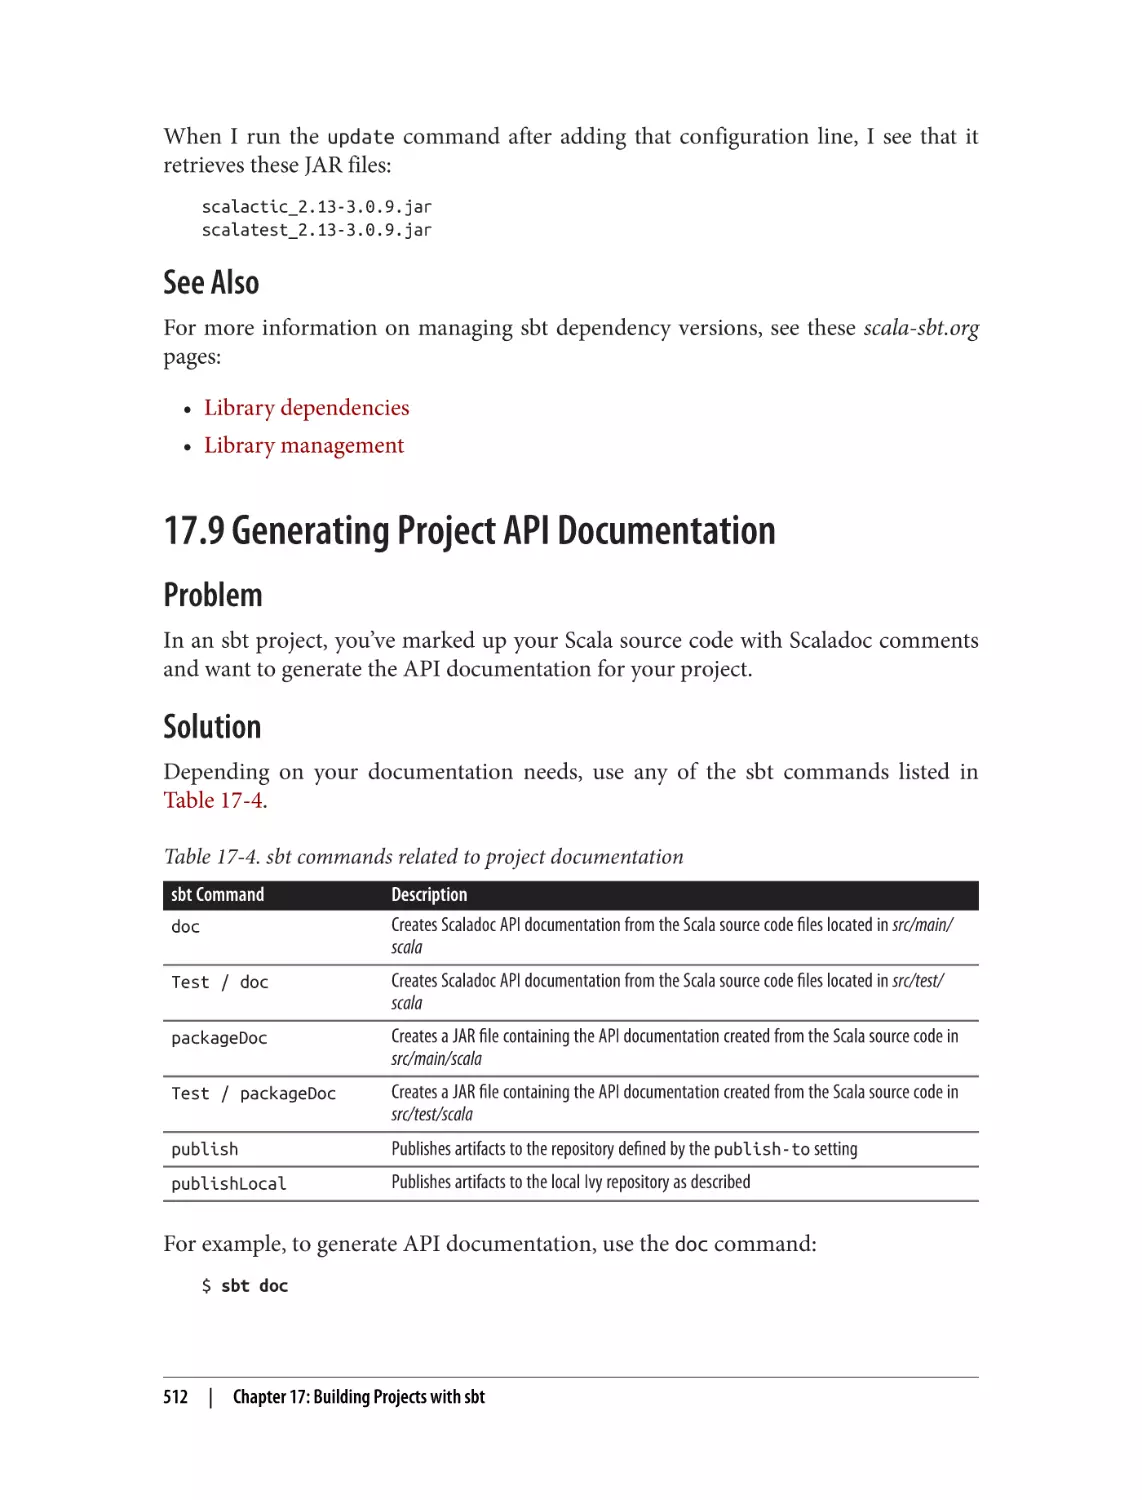 See Also
17.9 Generating Project API Documentation
Problem
Solution